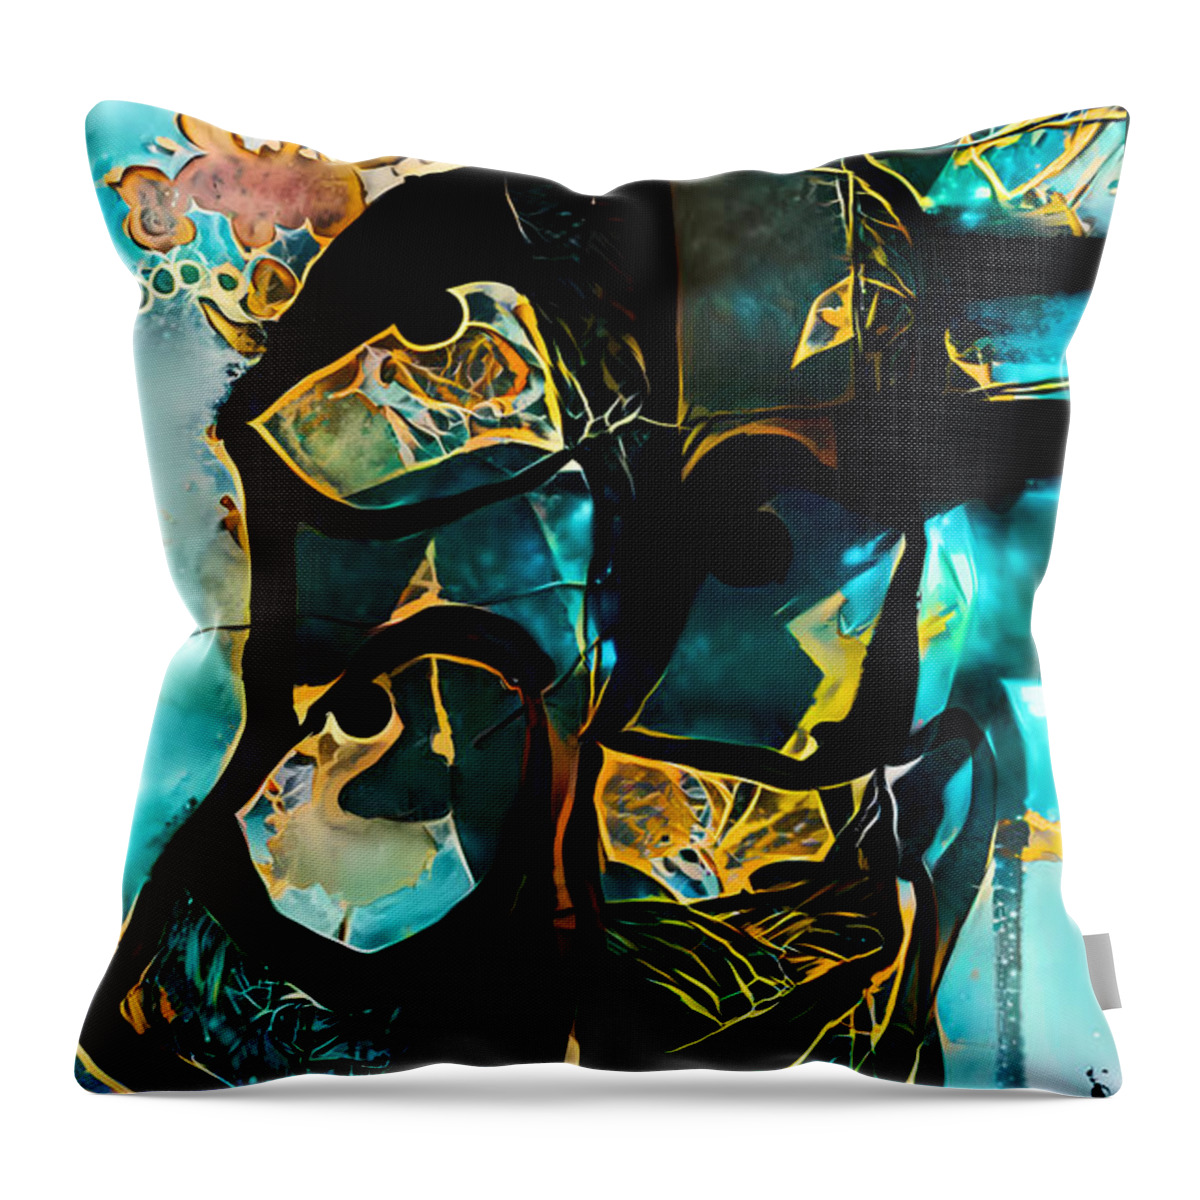 Contemporary Art Throw Pillow featuring the digital art 105 by Jeremiah Ray